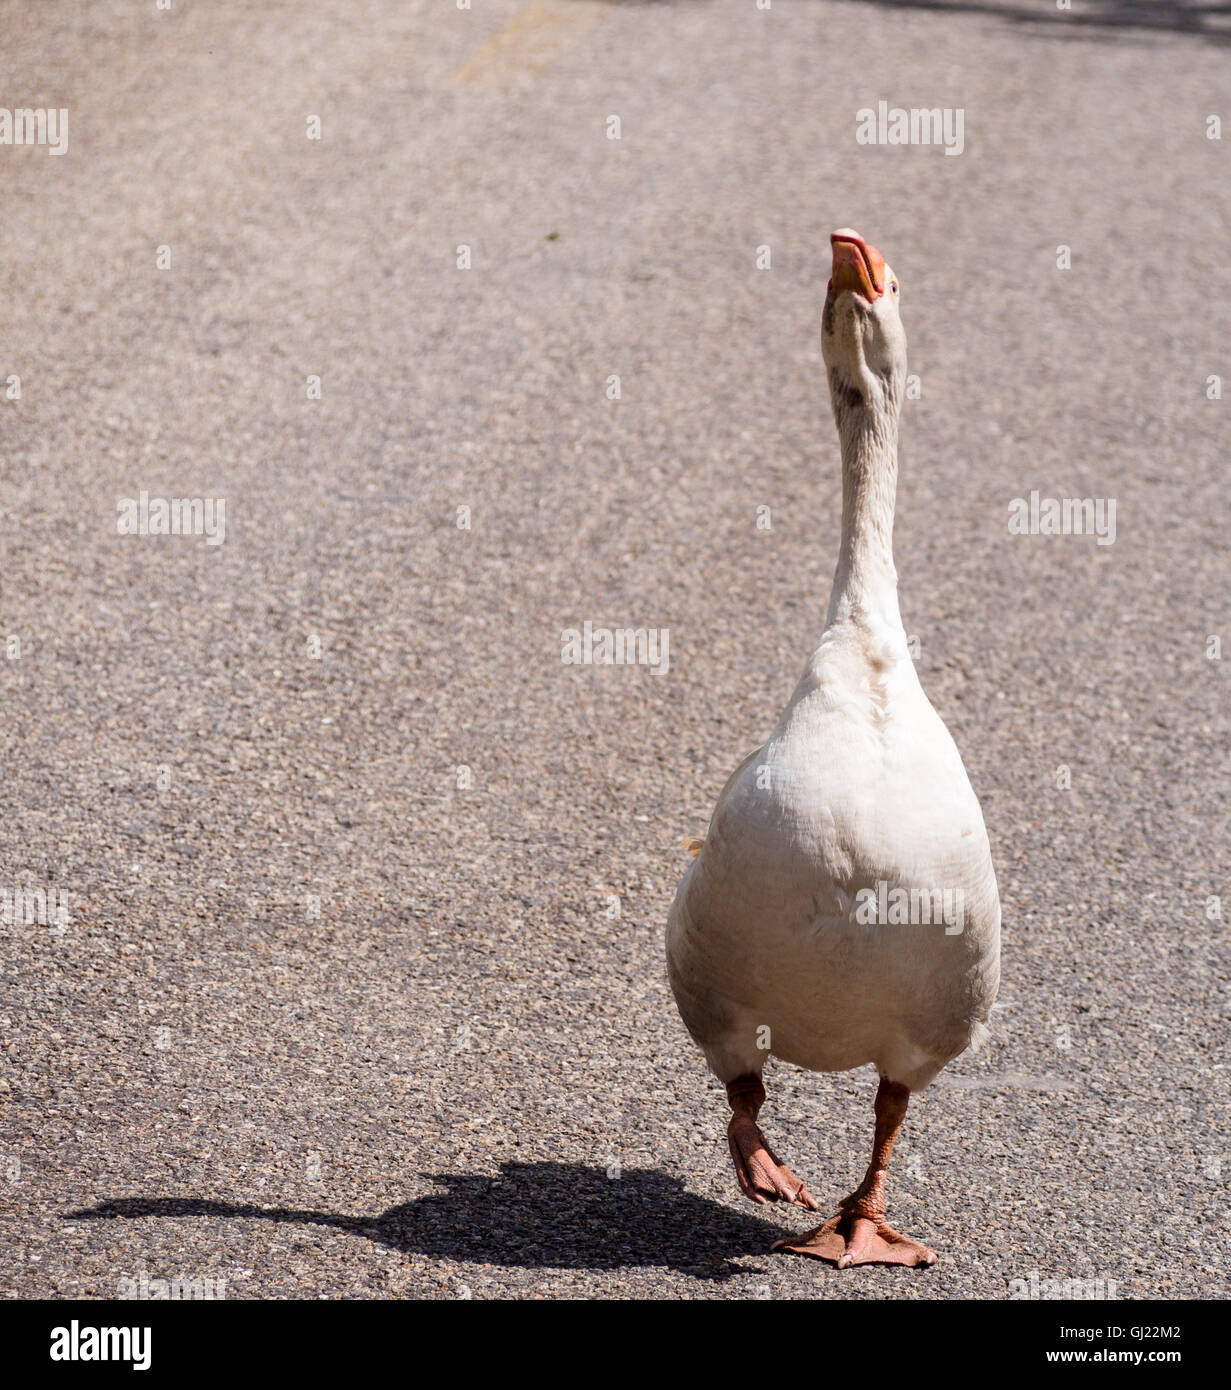 Territorial Goose stretching. A white domestic goose, head held high, asserting his territory on a rural road. Stock Photo